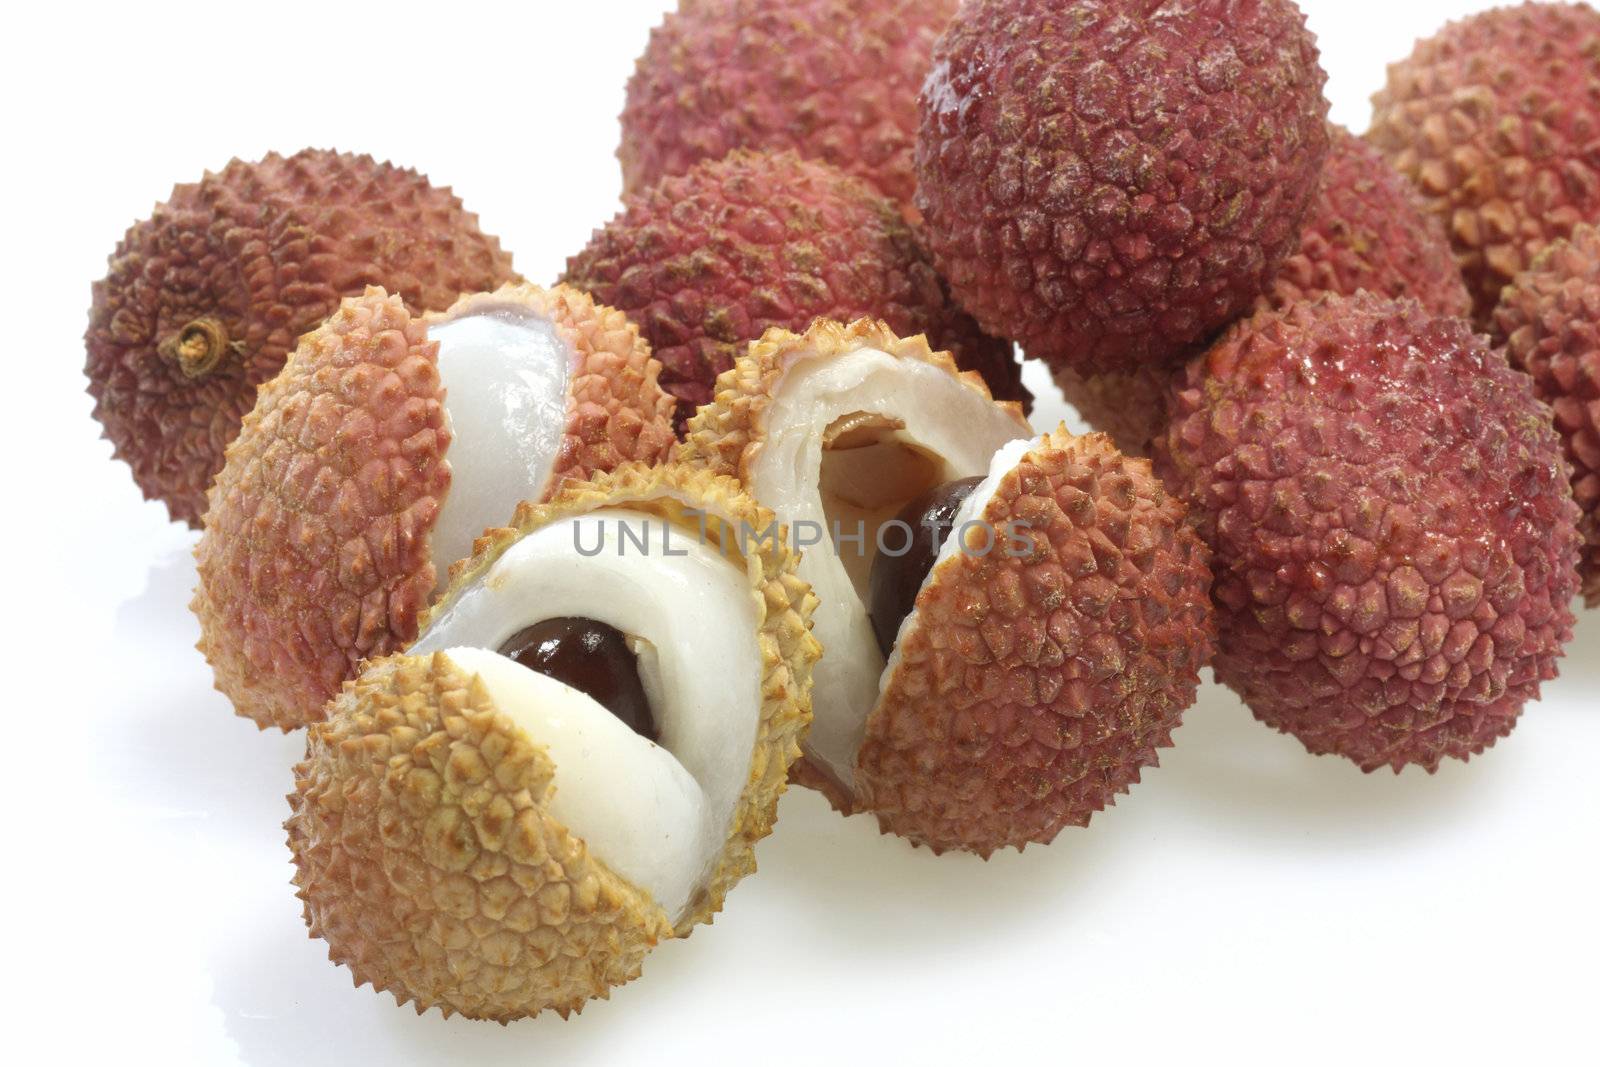 Closeup of fresh litchis over white background